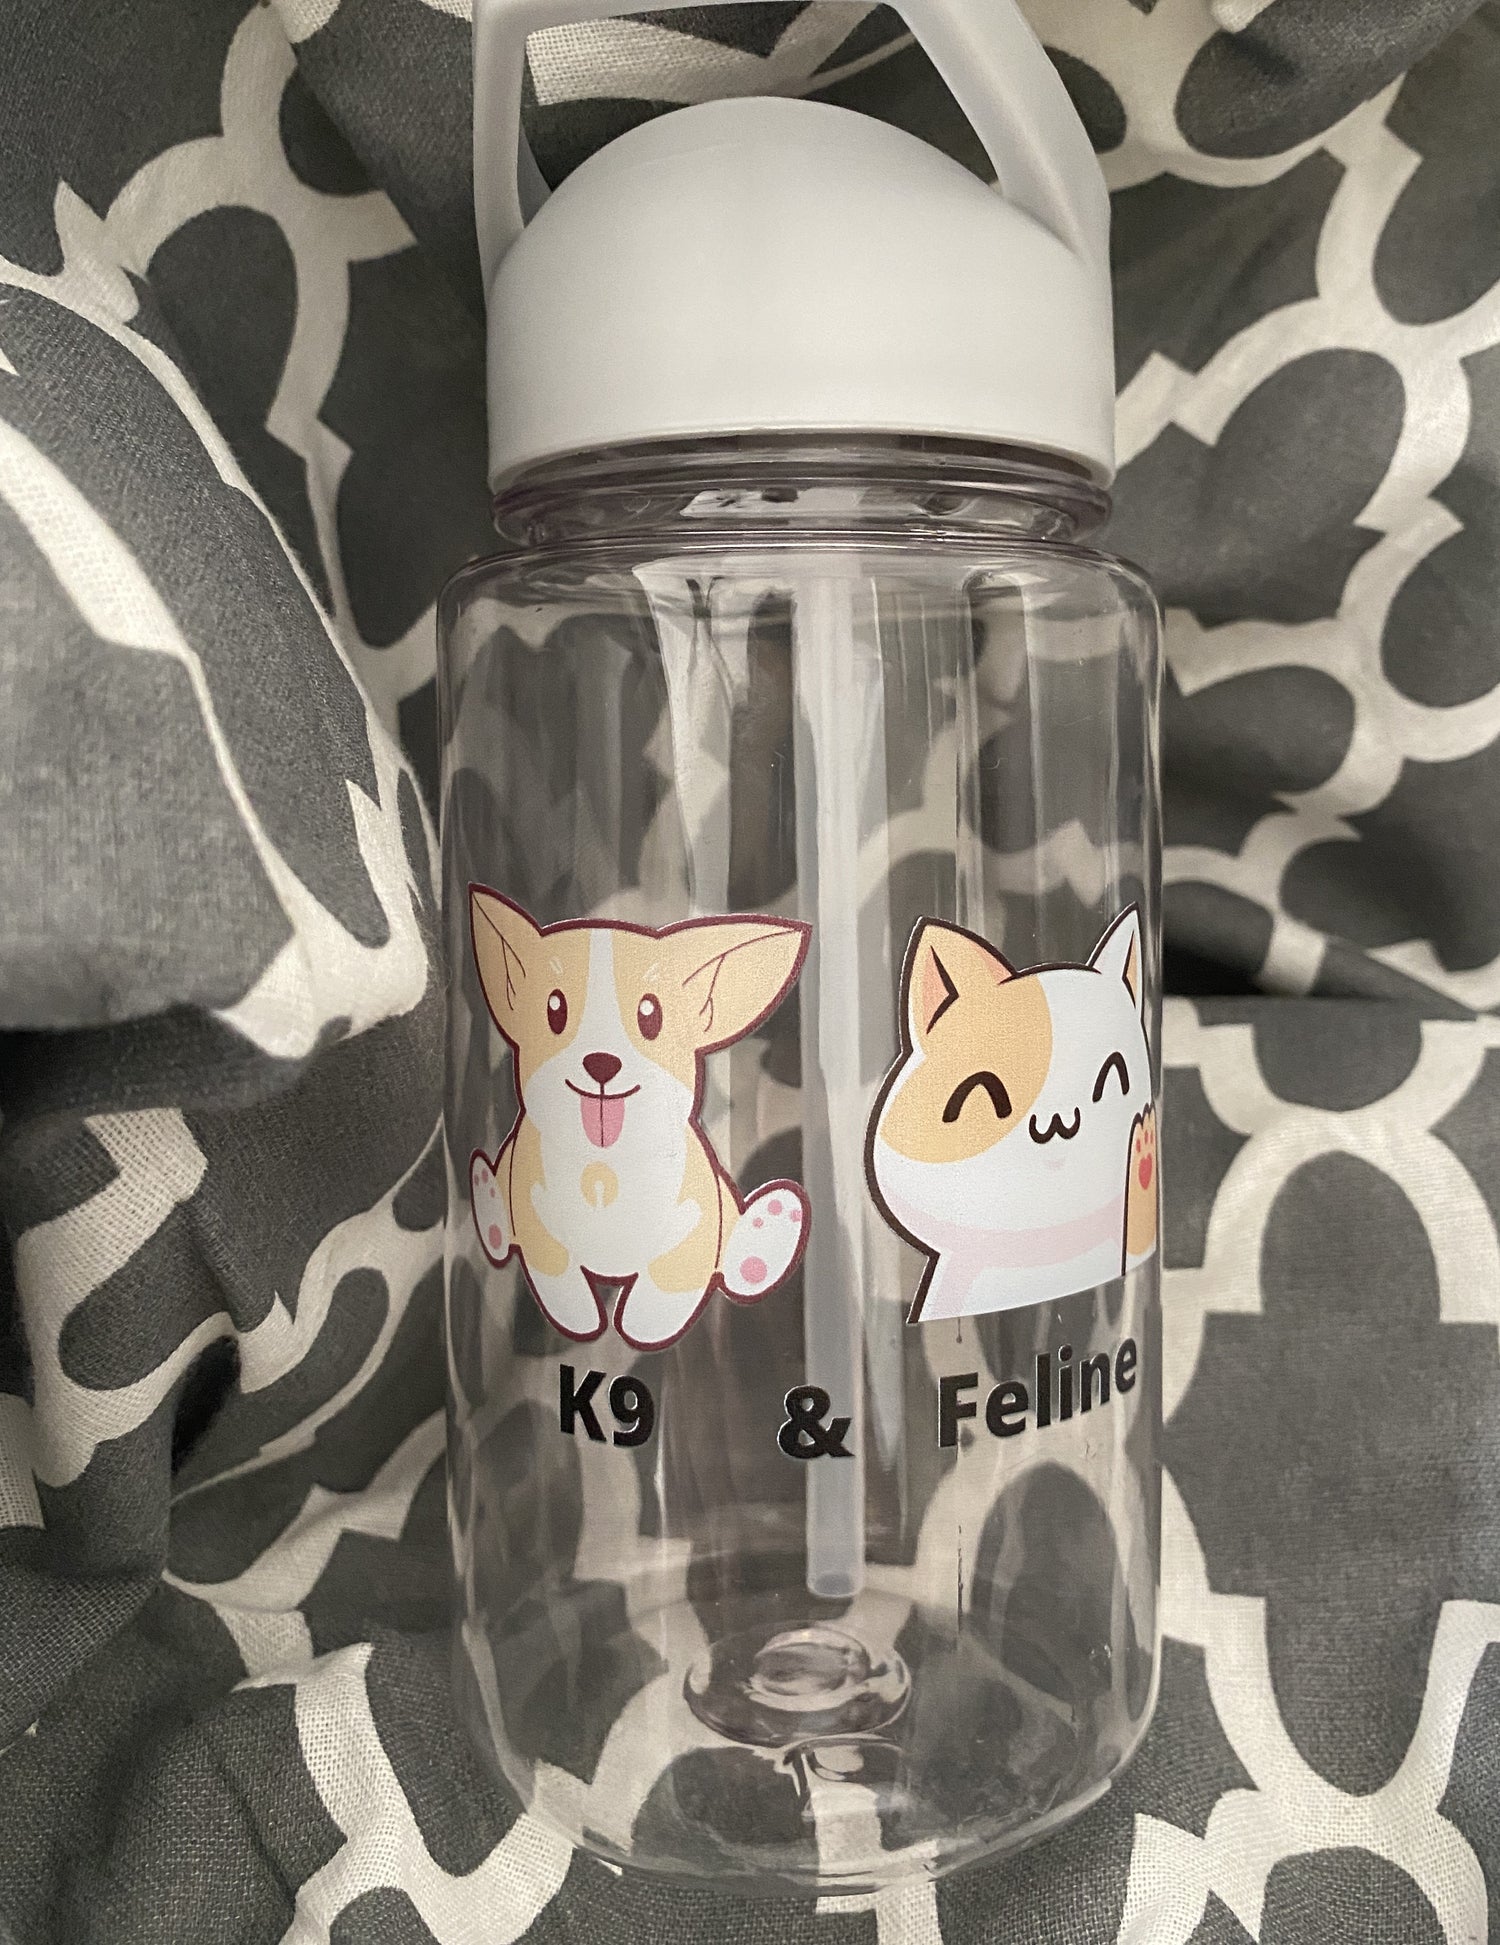 The 19.5 oz bottle with a cute cat and dog design. It is sitting on a soft fabric with white and grey patterns